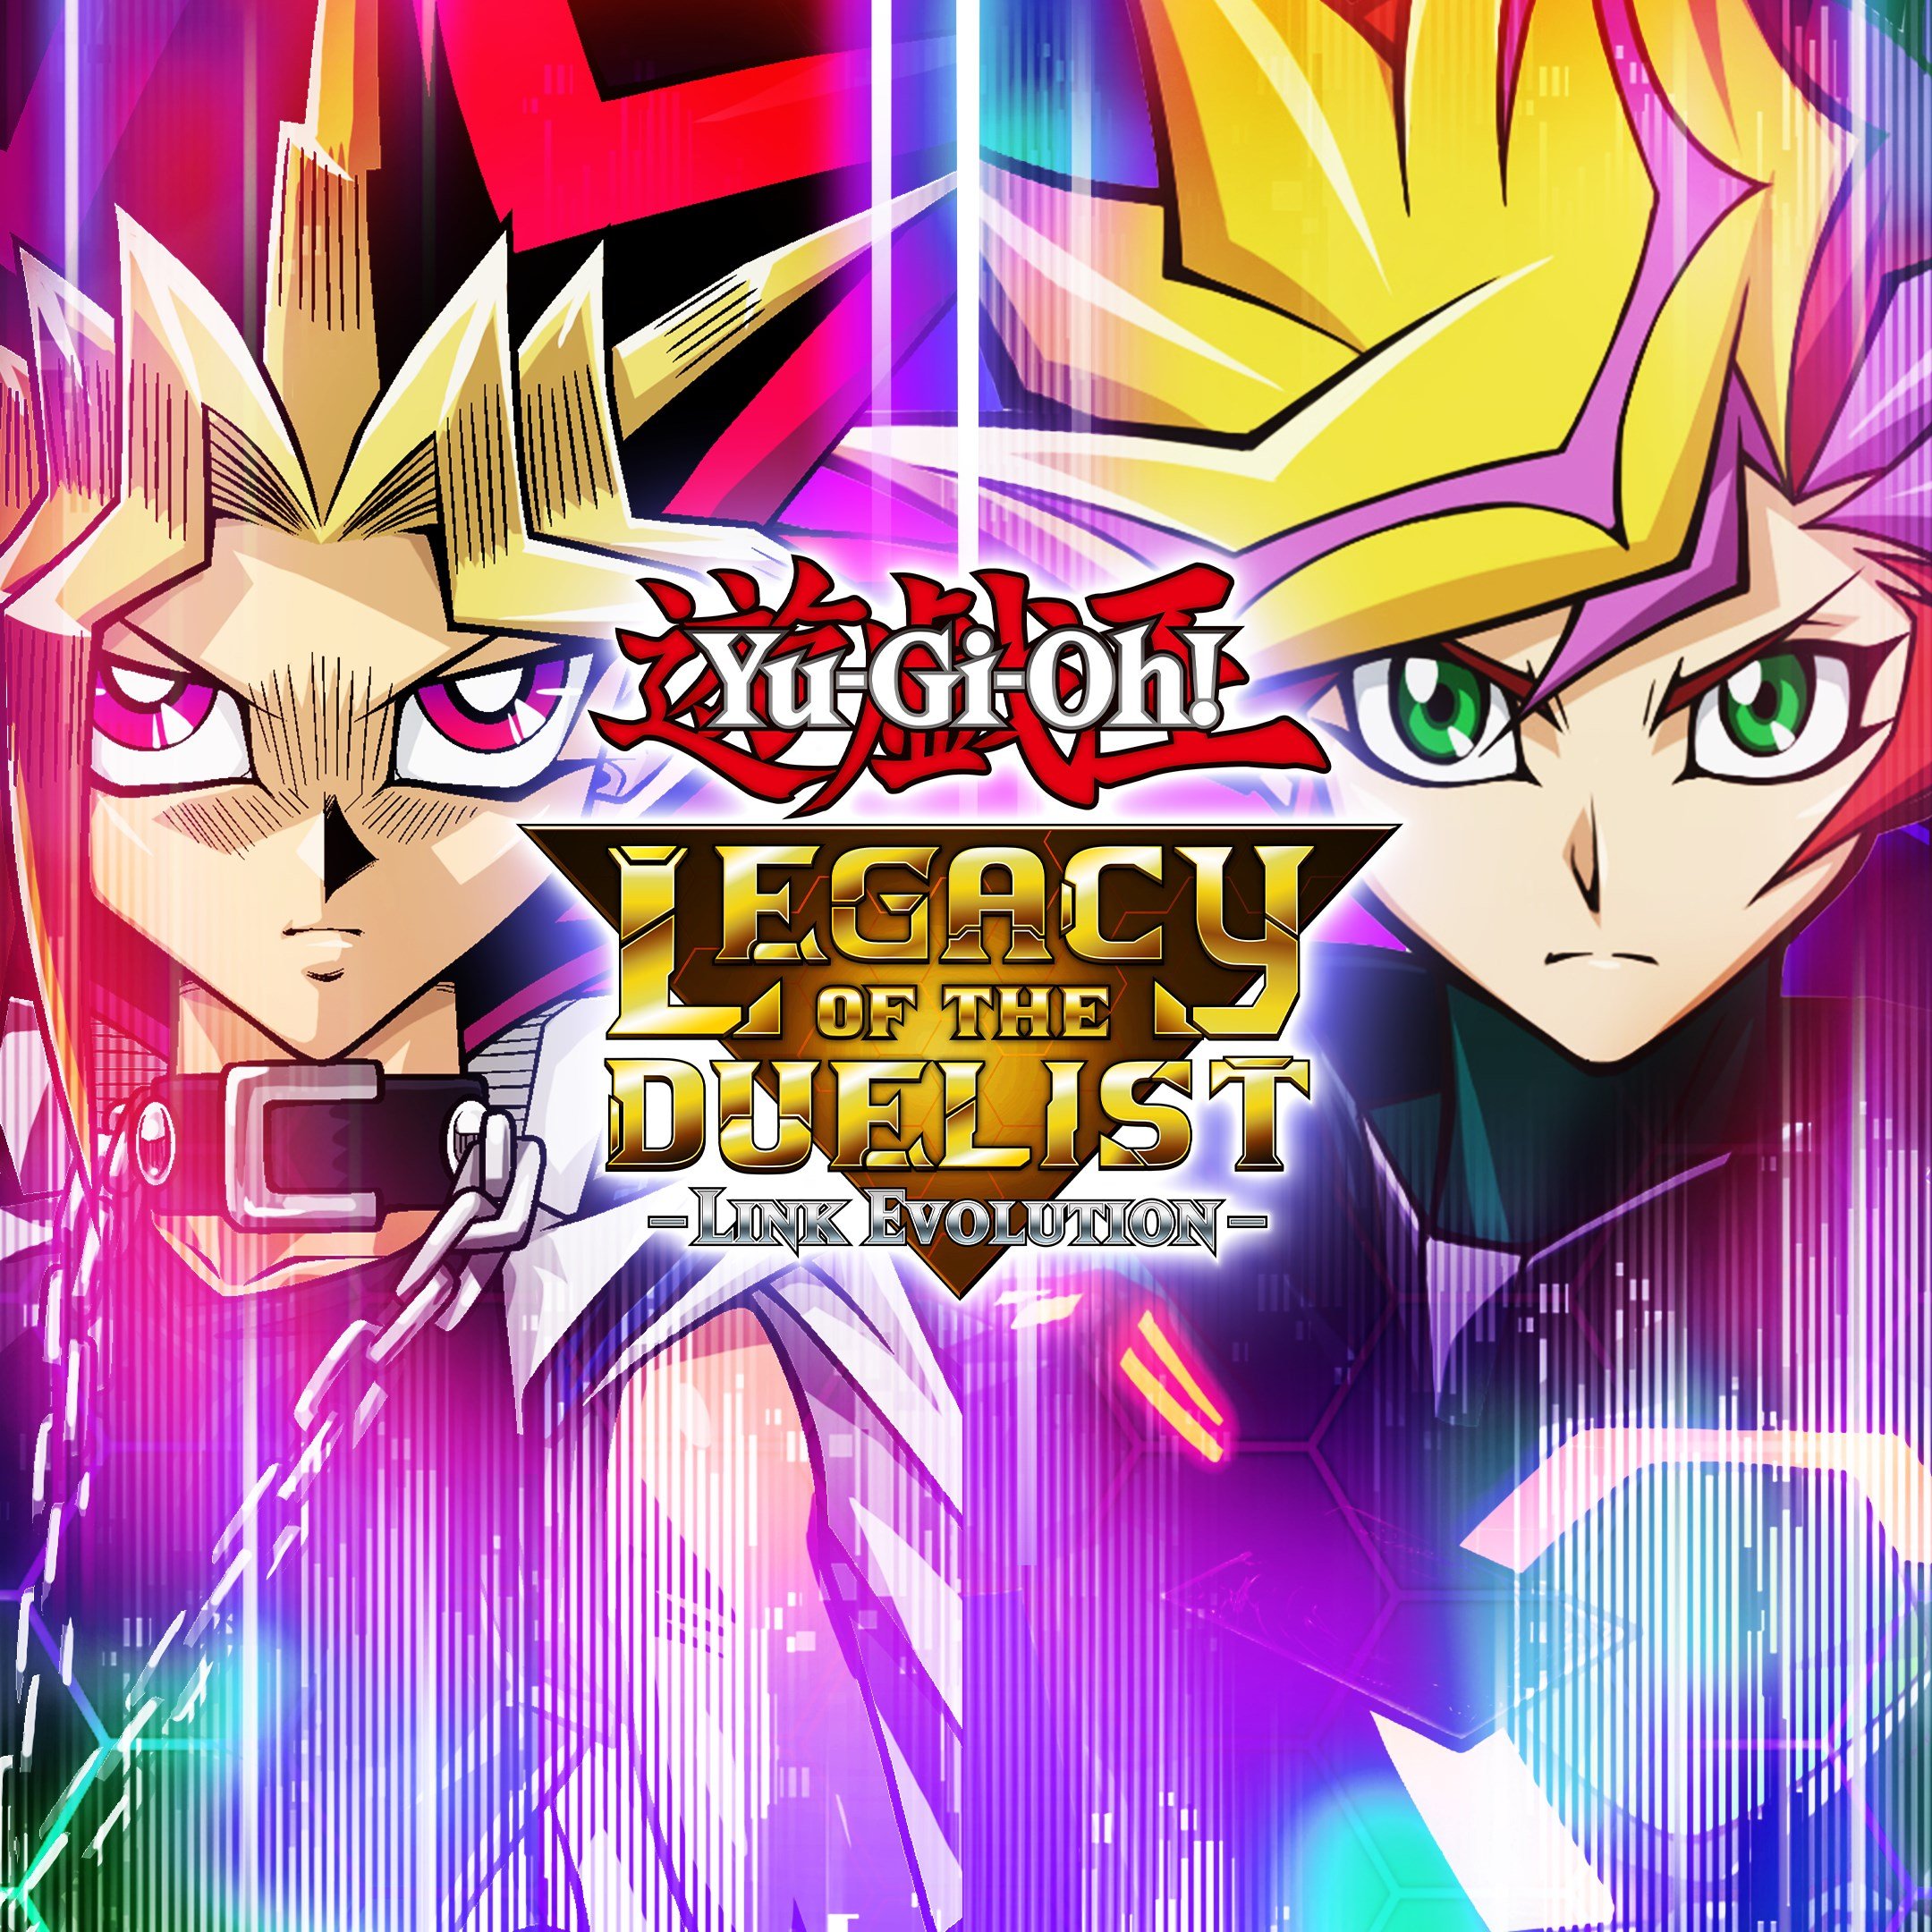 Boxart for Yu-Gi-Oh! Legacy of the Duelist: Link Evolution